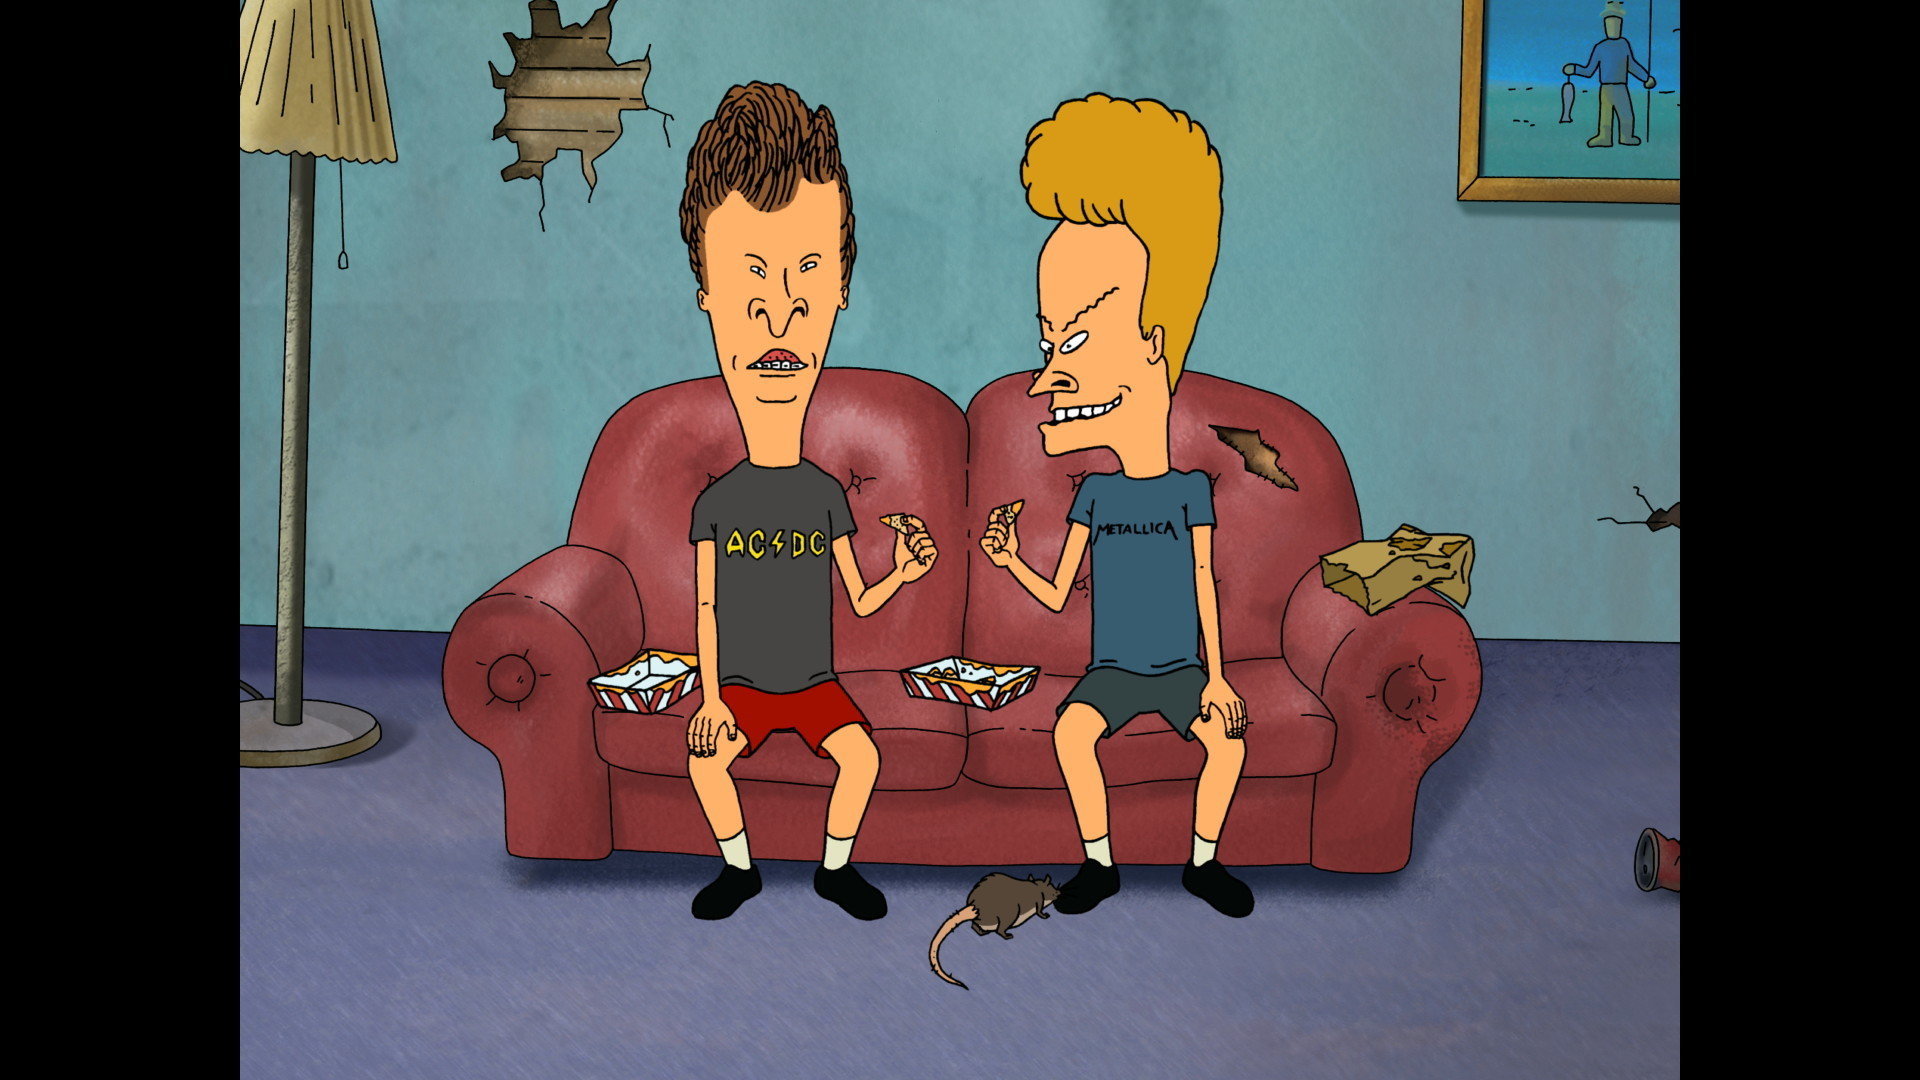 download new beavis and buttheads show 2022